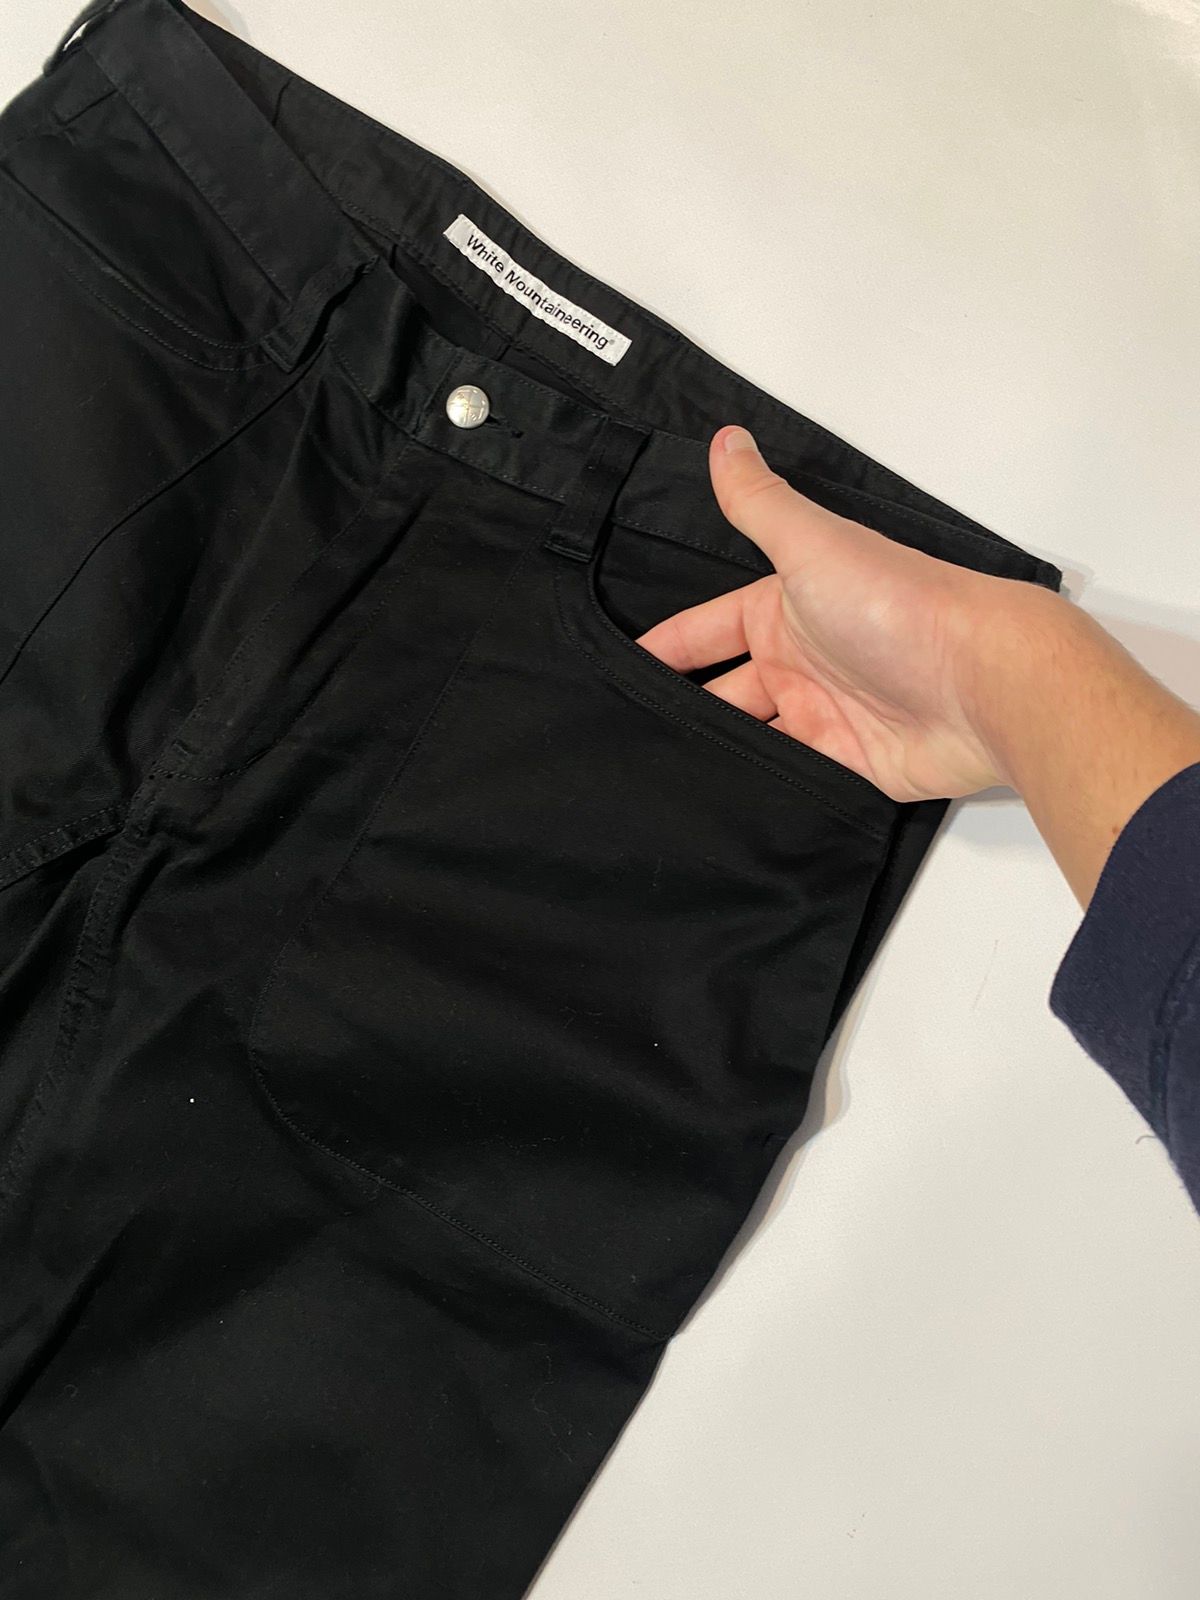 White Mountaineering MADE IN JAPAN White Moutaineering Casual Black Pants Size US 34 / EU 50 - 8 Thumbnail